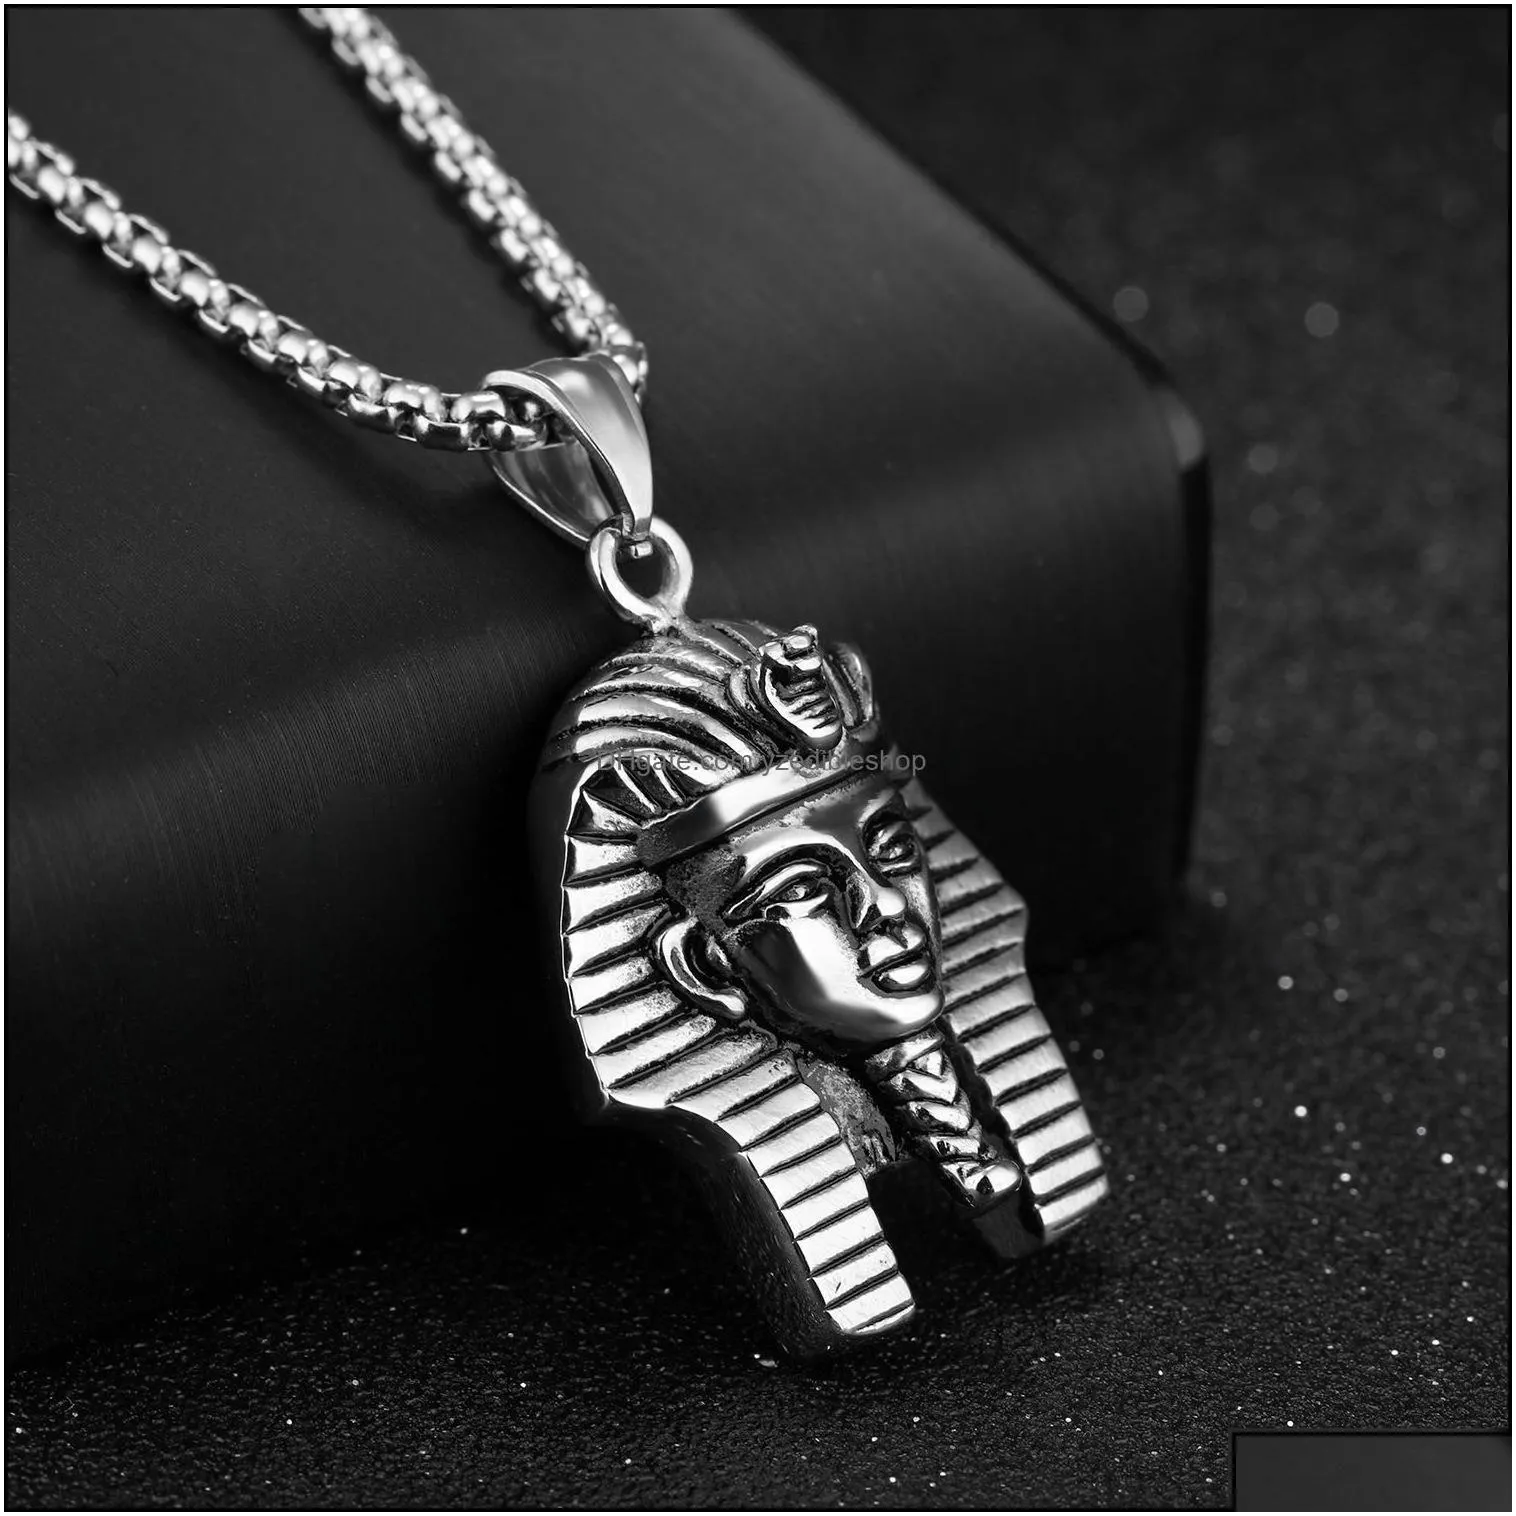 pendant necklaces men hip hop stainless steel egyptian pharaoh head chain punk jewelr yzedibleshop drop delivery jewelry pendants